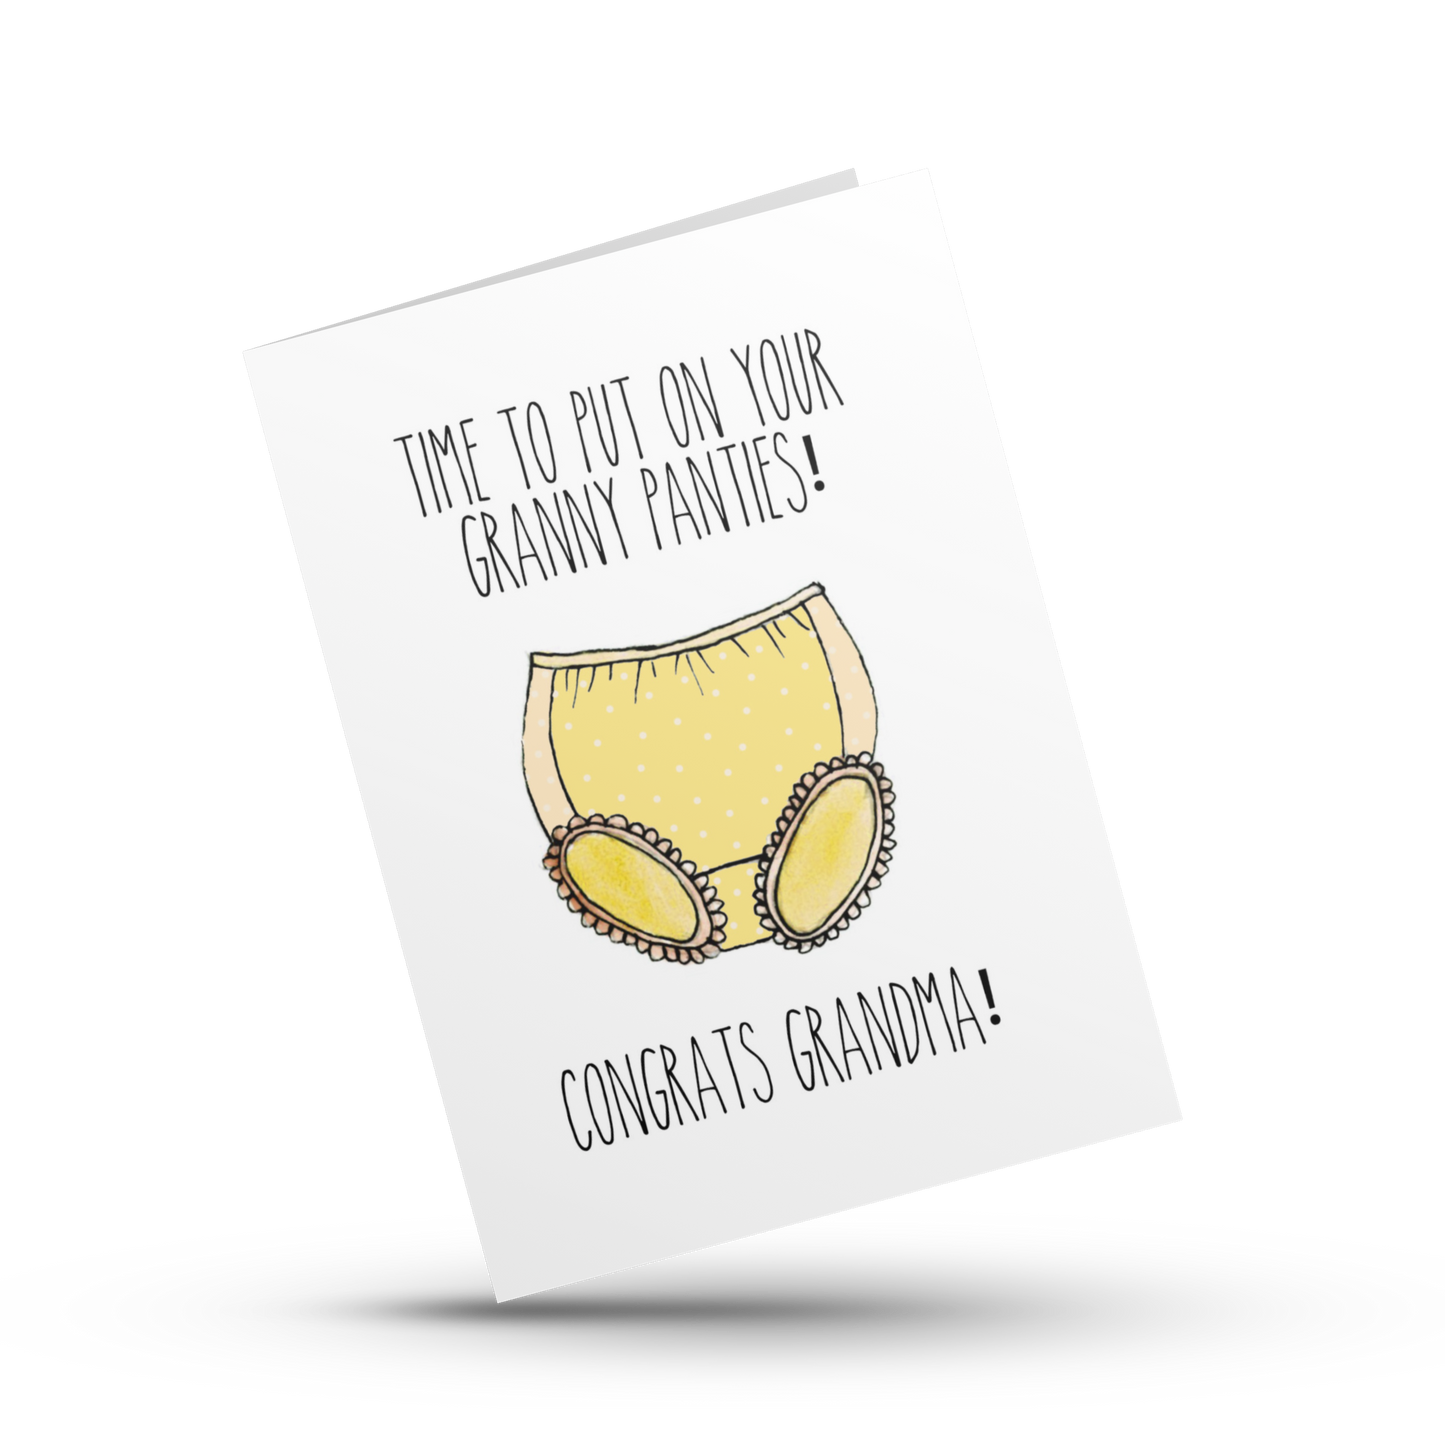 Time to put on your granny panties, Congrats Grandma, New Grandma card, Grandmother card, Gender neutral baby announcement,Expectant Grandma